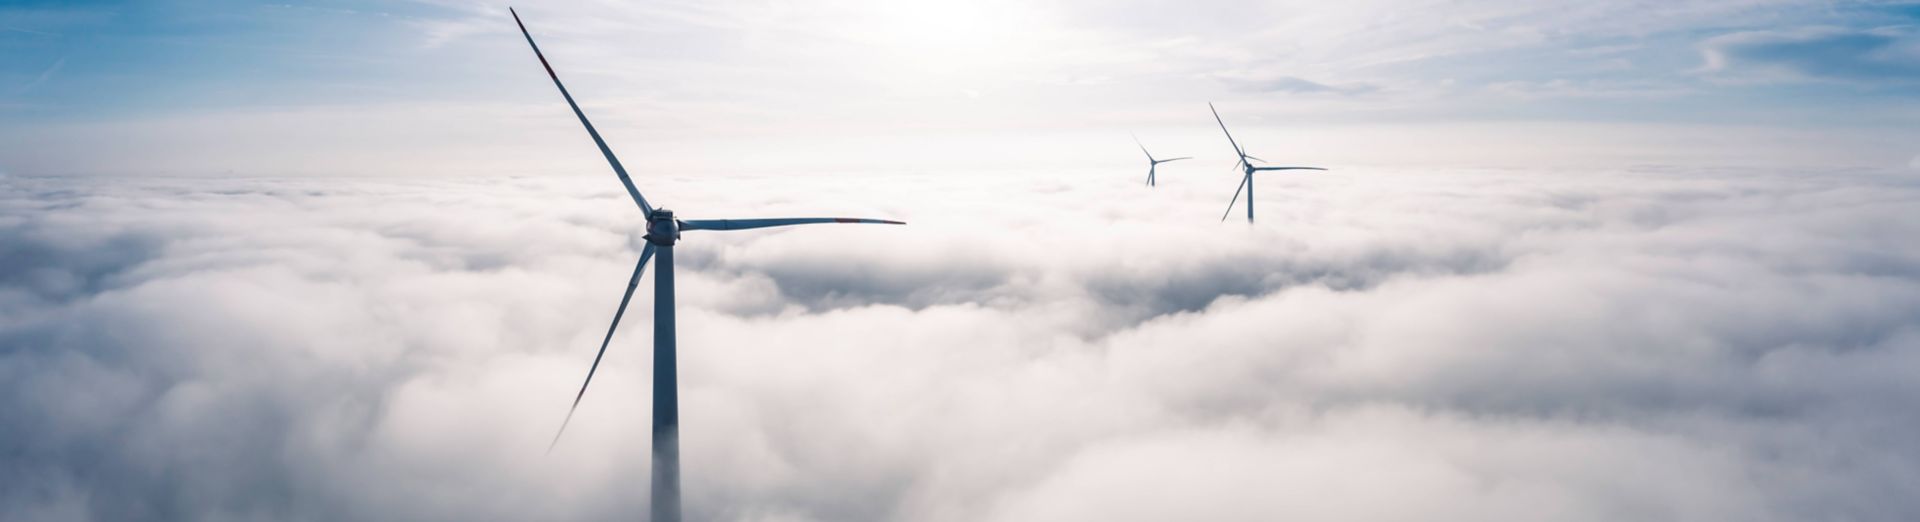 Aerial view of wind turbines shrouded in clouds at sunrise